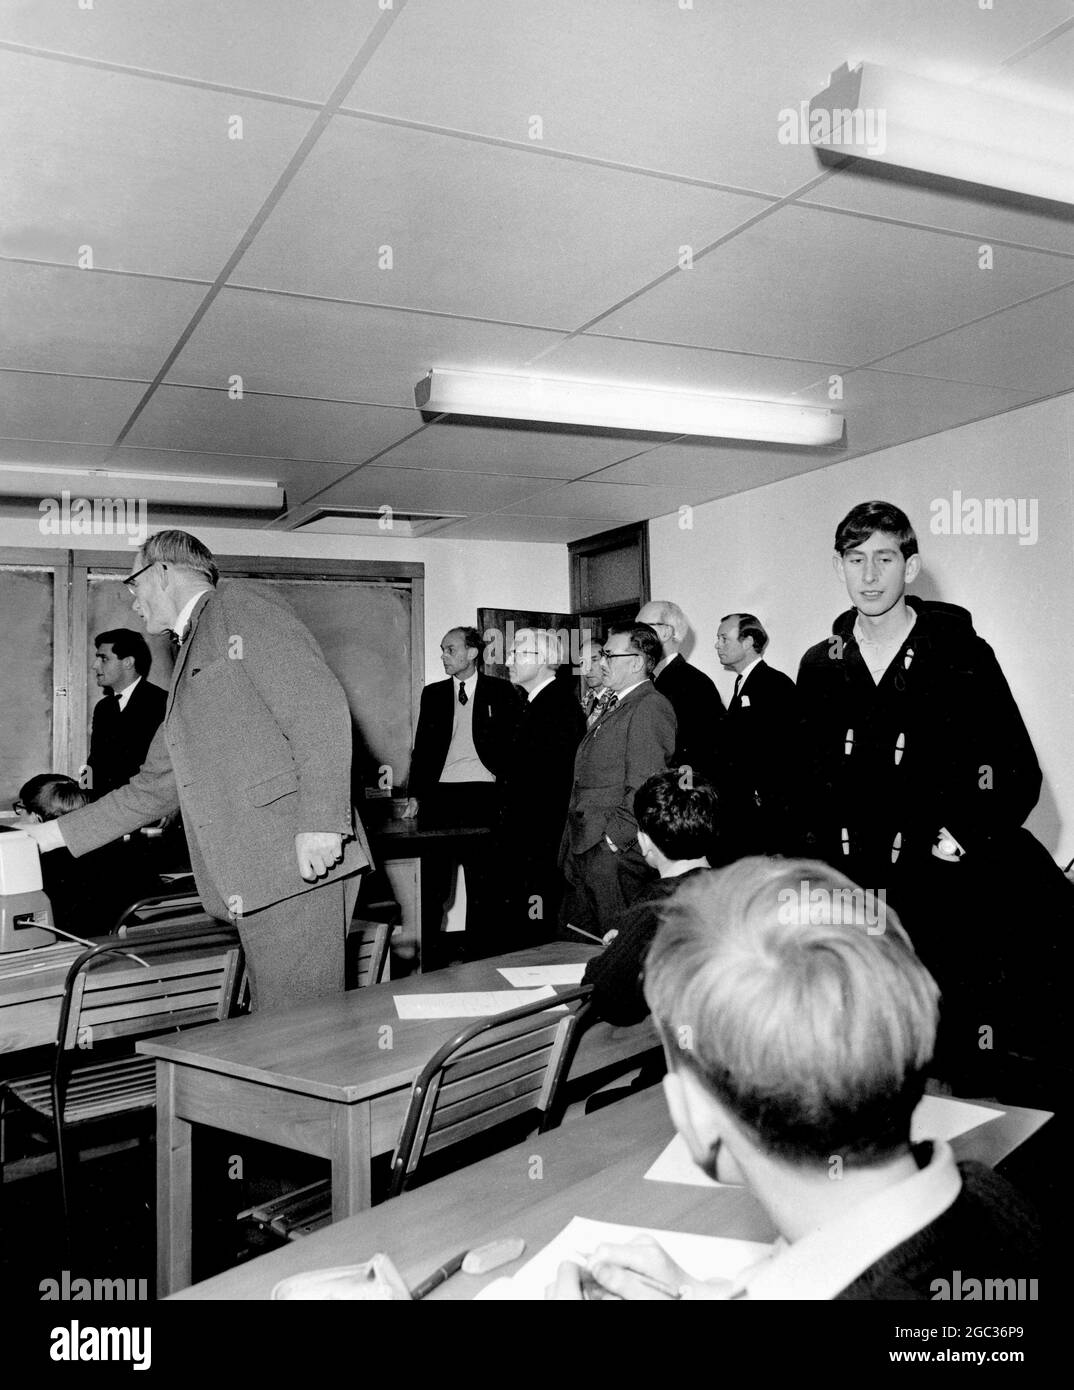 Prince Charles The Prince of Wales in the classroom at his school Gordonstoun Scotland November 14th 1966 Stock Photo